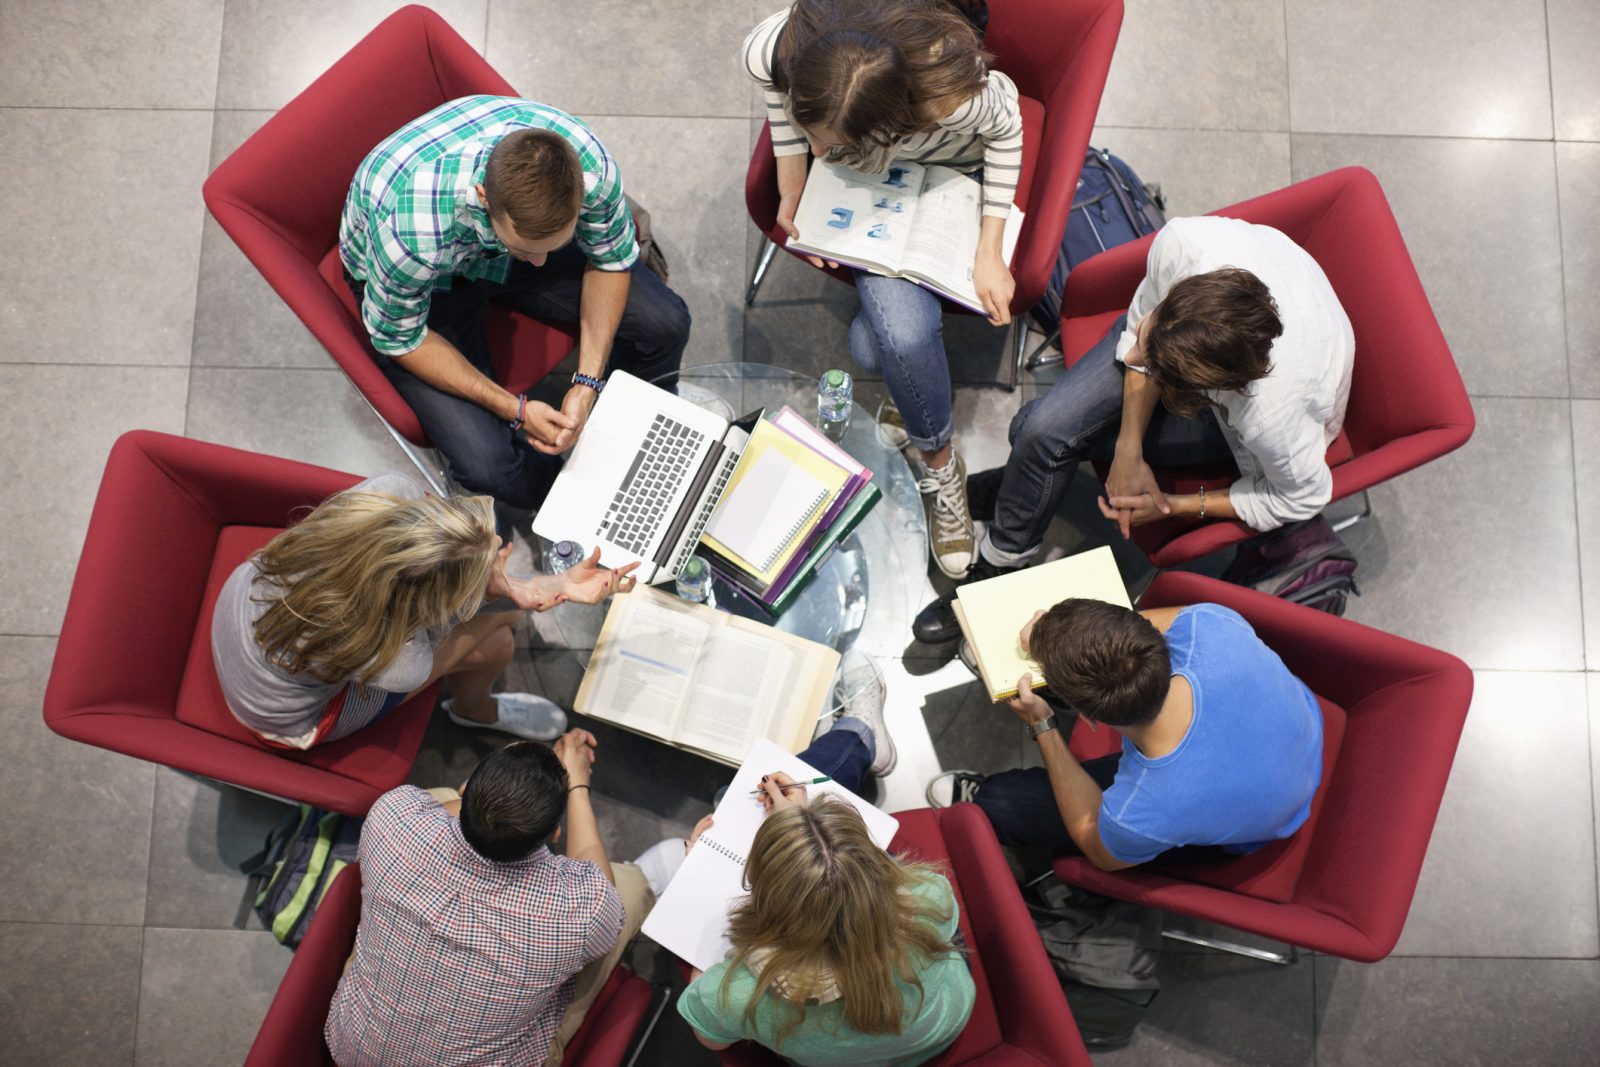 A group of people sit in a study circle with laptops and notepads.